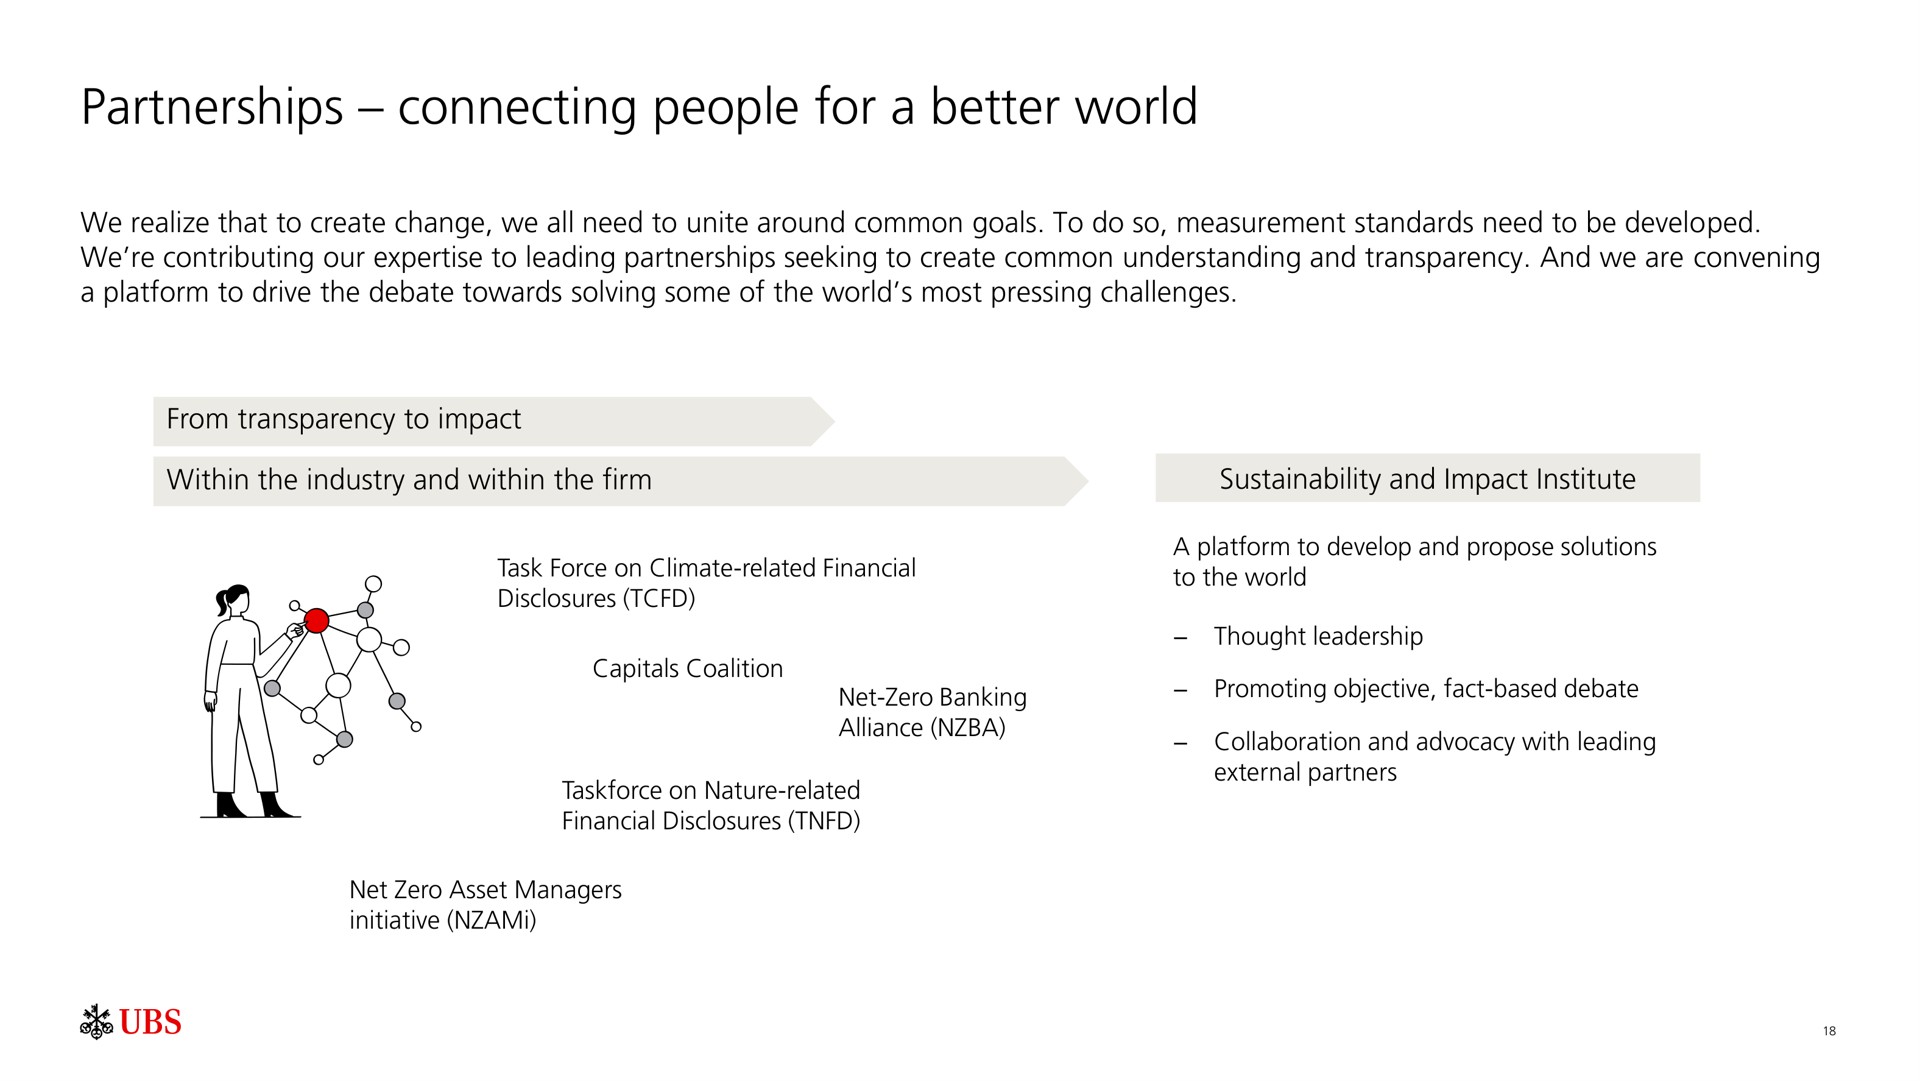 partnerships connecting people for a better world | UBS